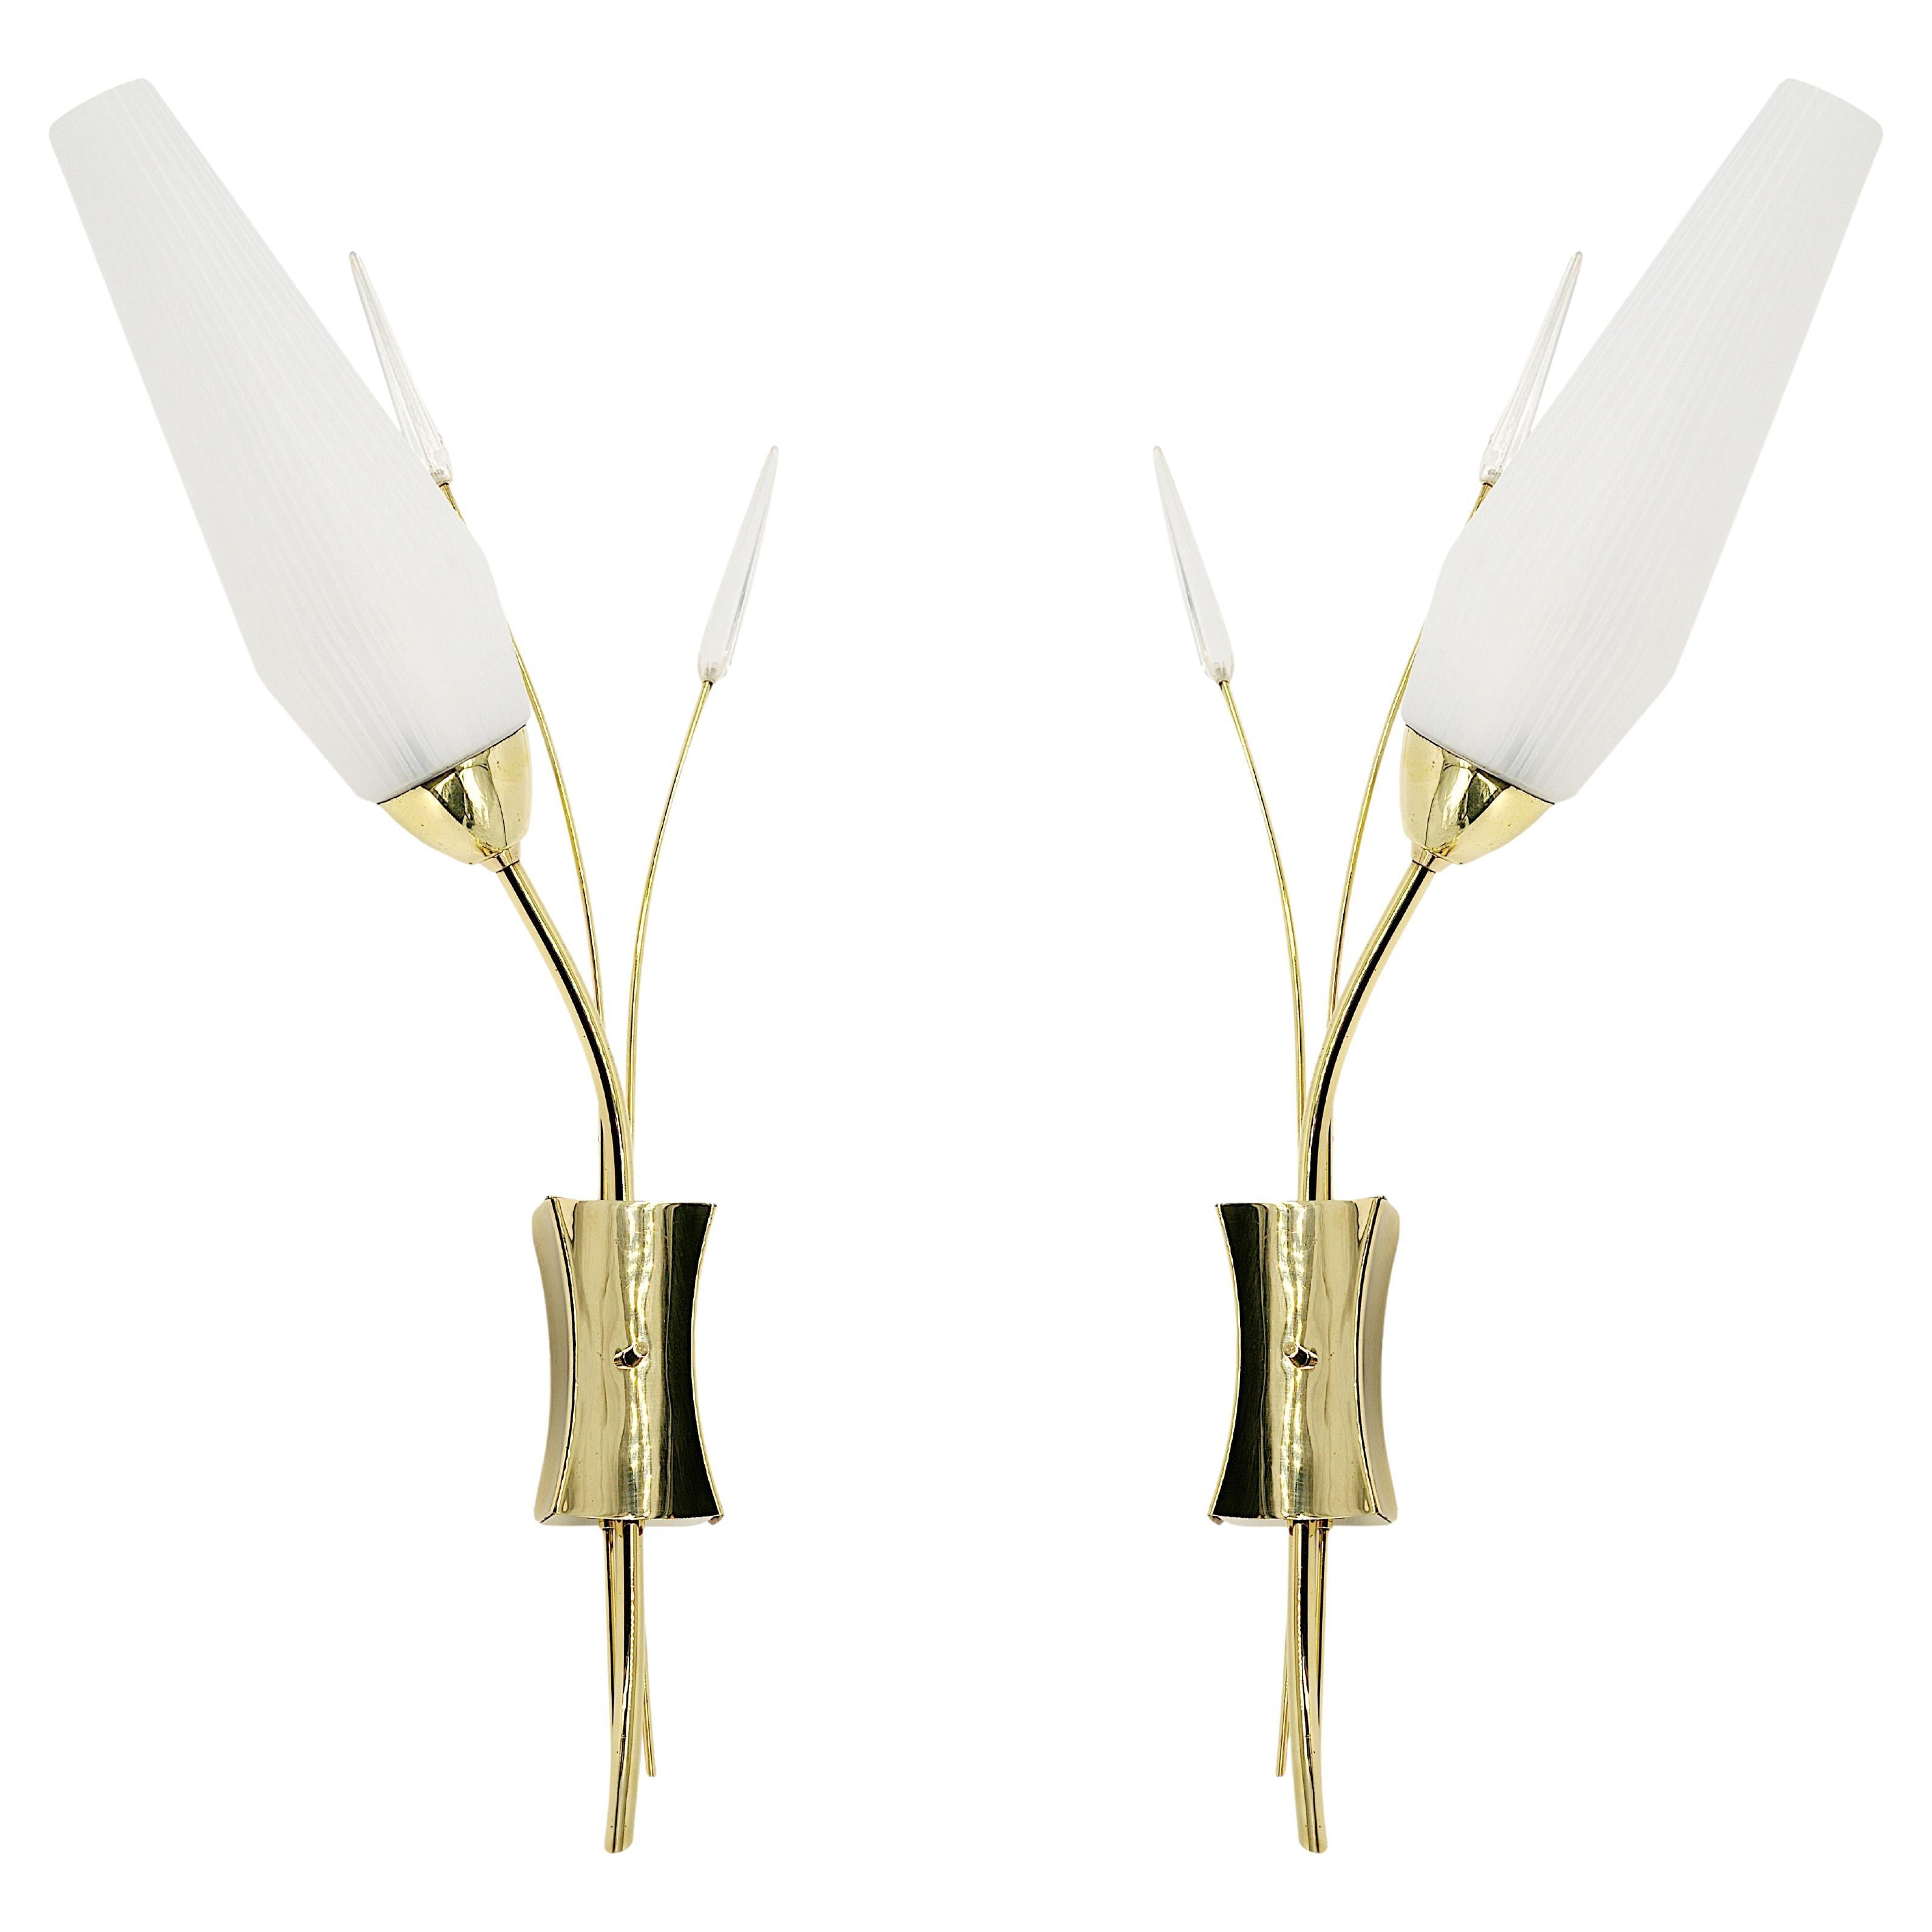 Maison Lunel French Midcentury Wall Lights Pair, 1950s For Sale